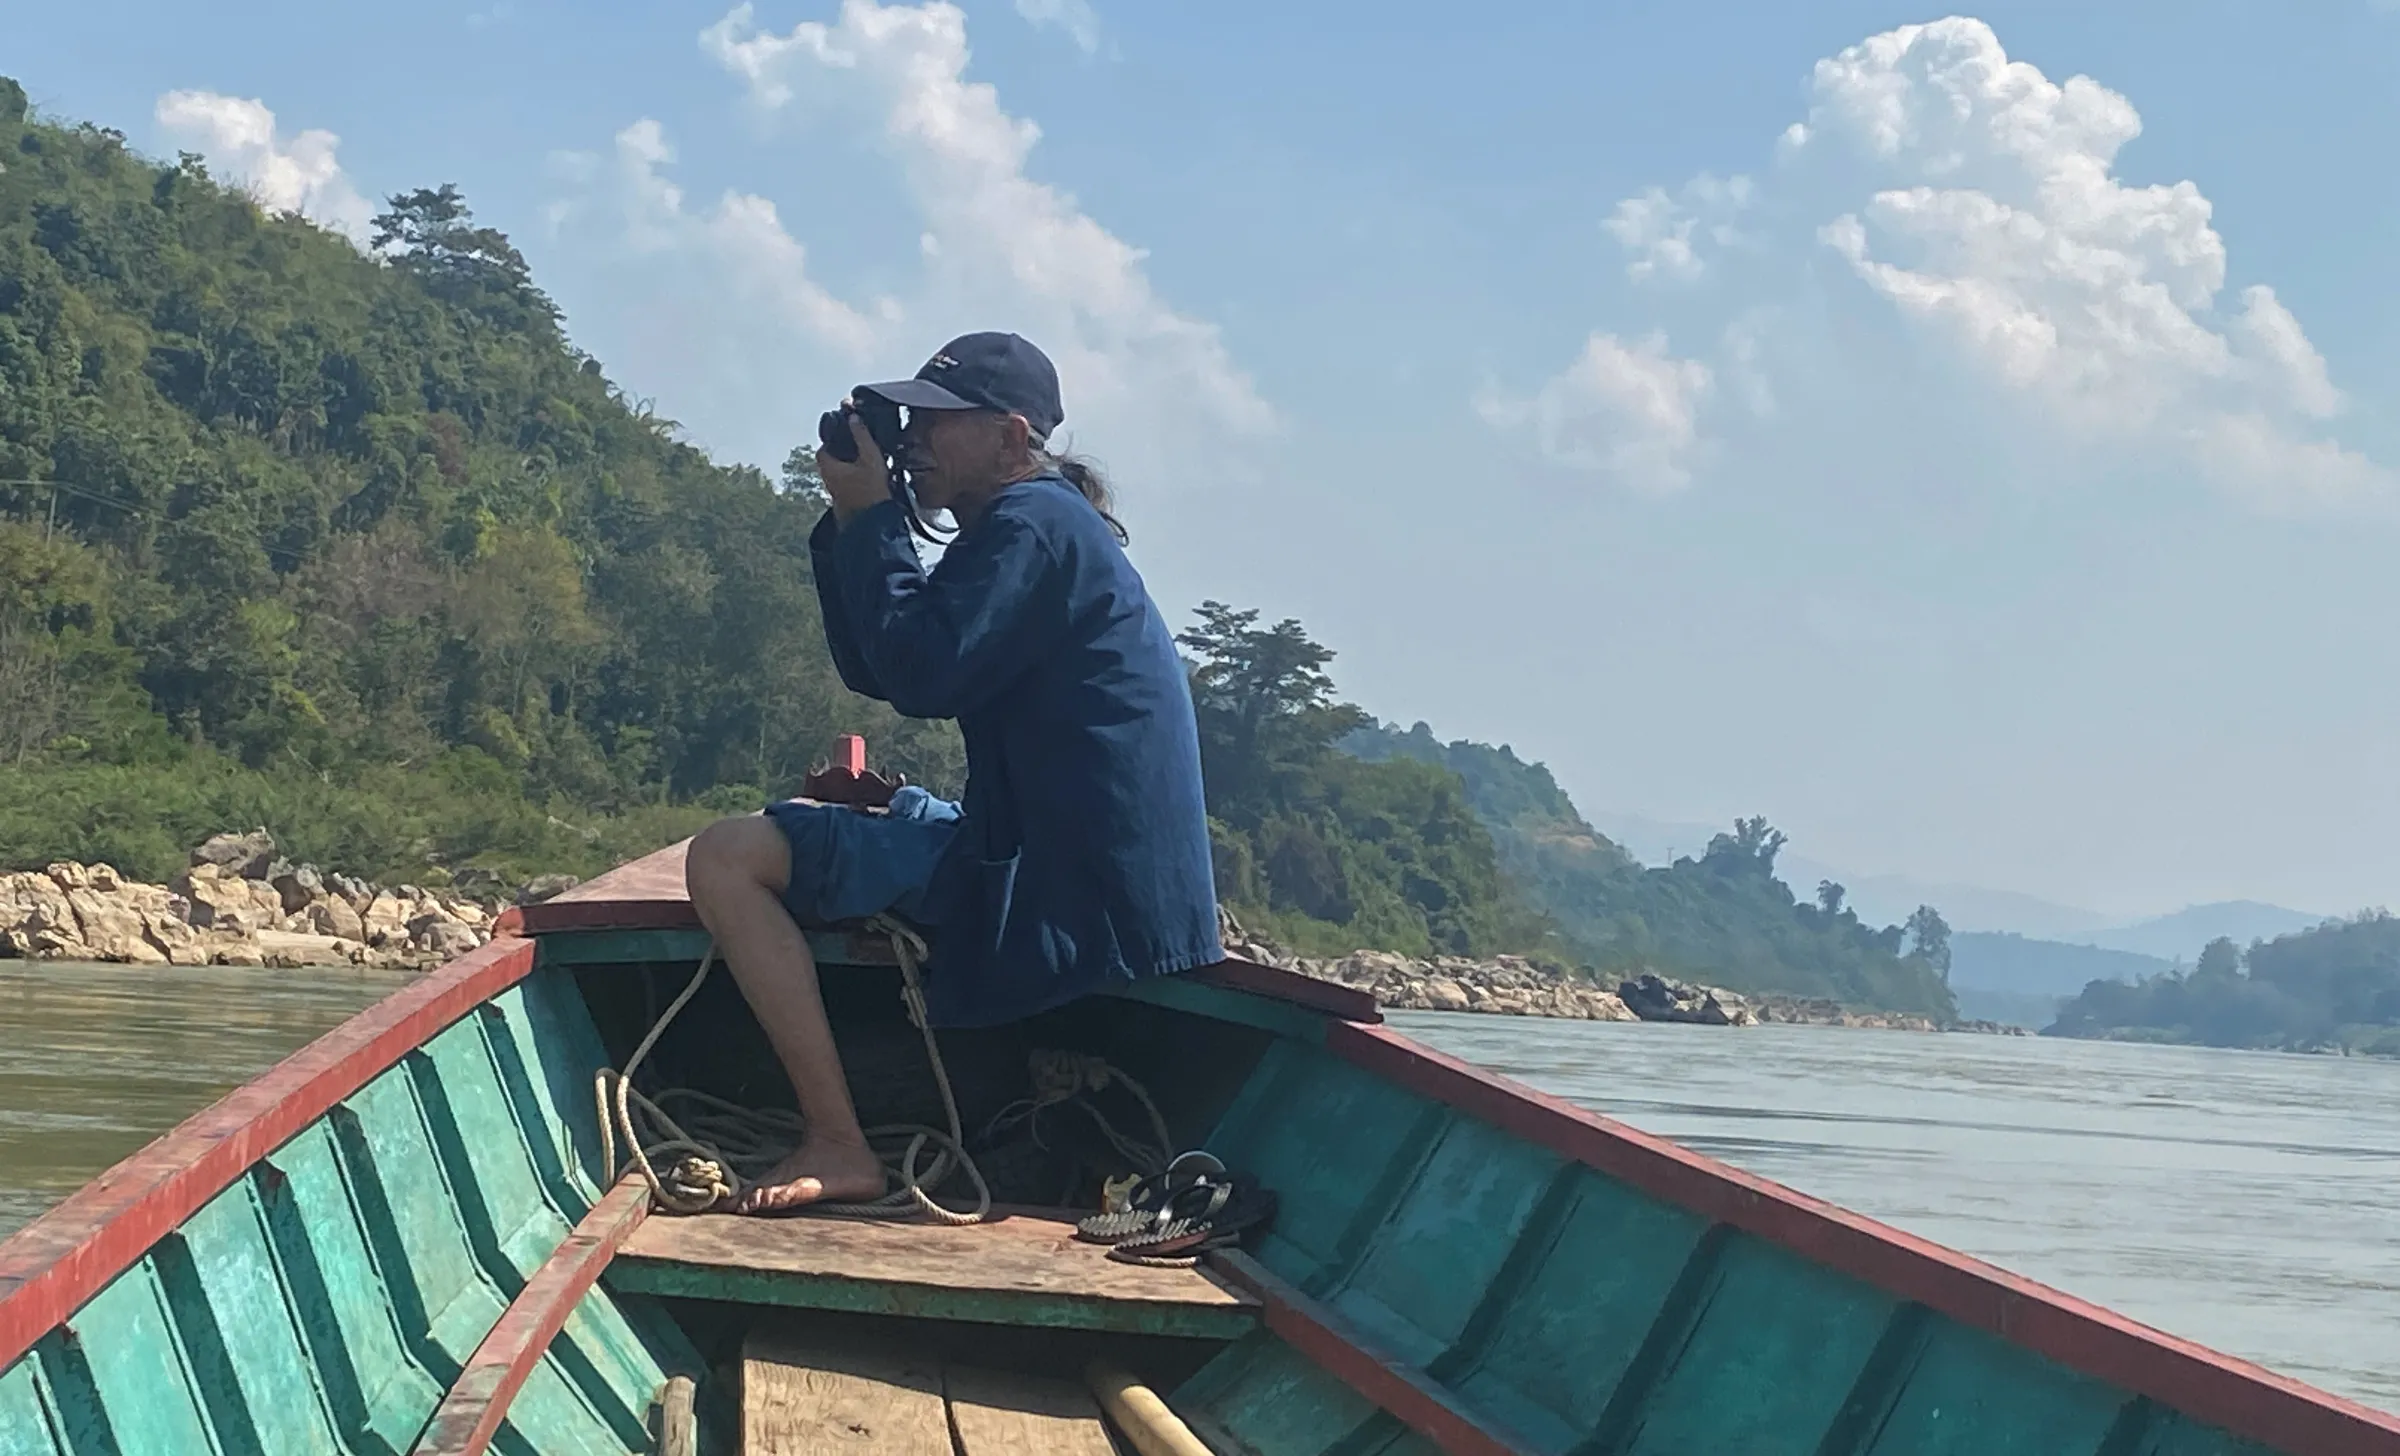 Conservationist Niwat Roykaew takes a picture on a boat on the Mekong River along the Thai-Laos border. February 6, 2023. Thomson Reuters Foundation/Rina Chandran